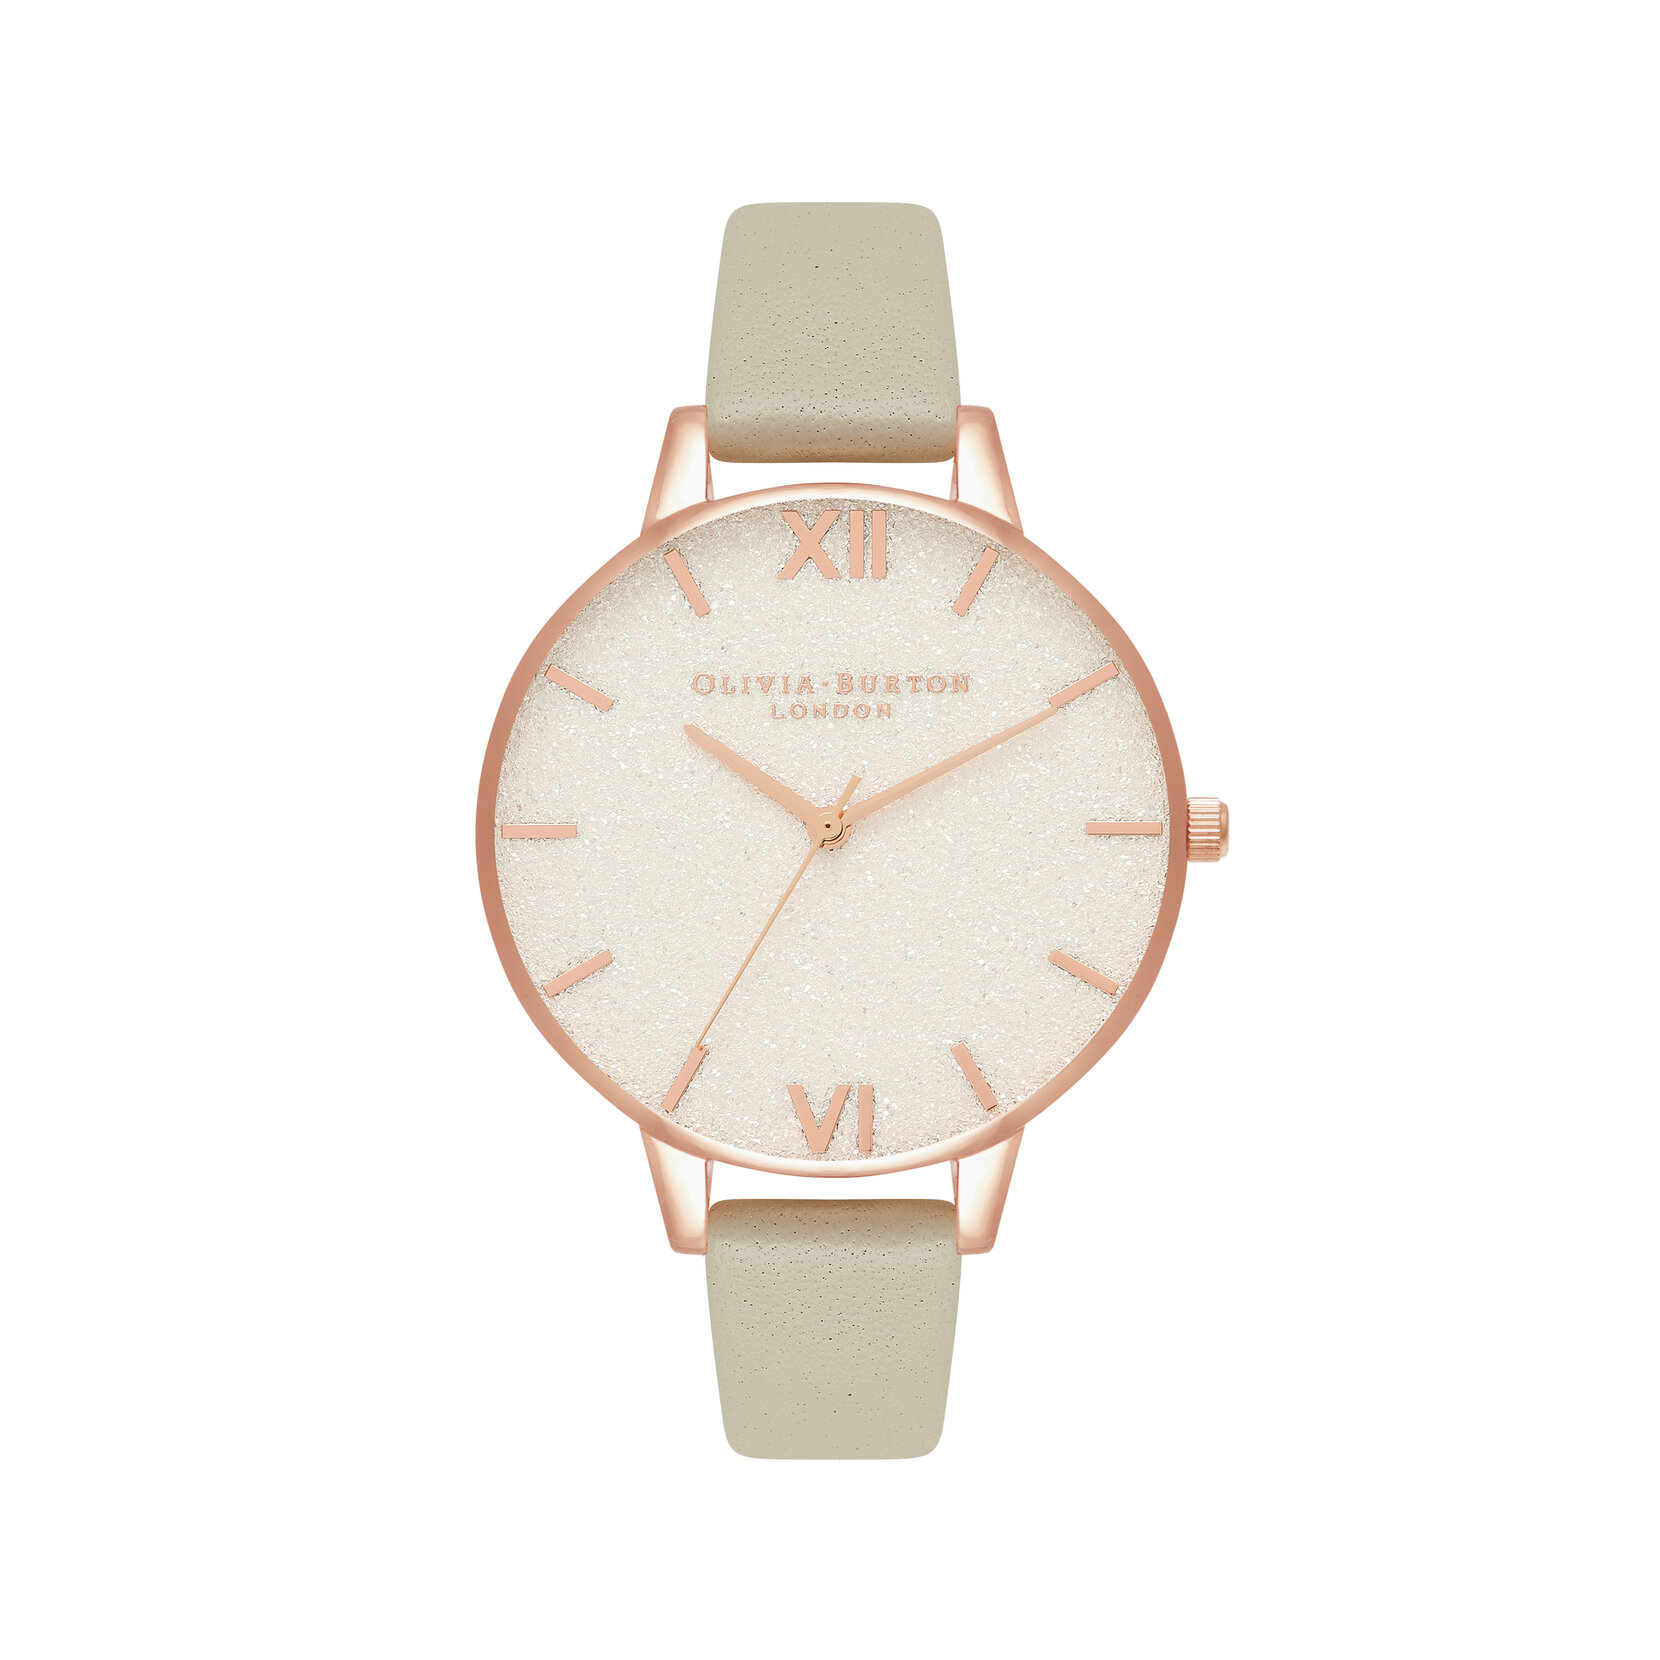 38mm Rose Gold & Gray Leather Strap Watch